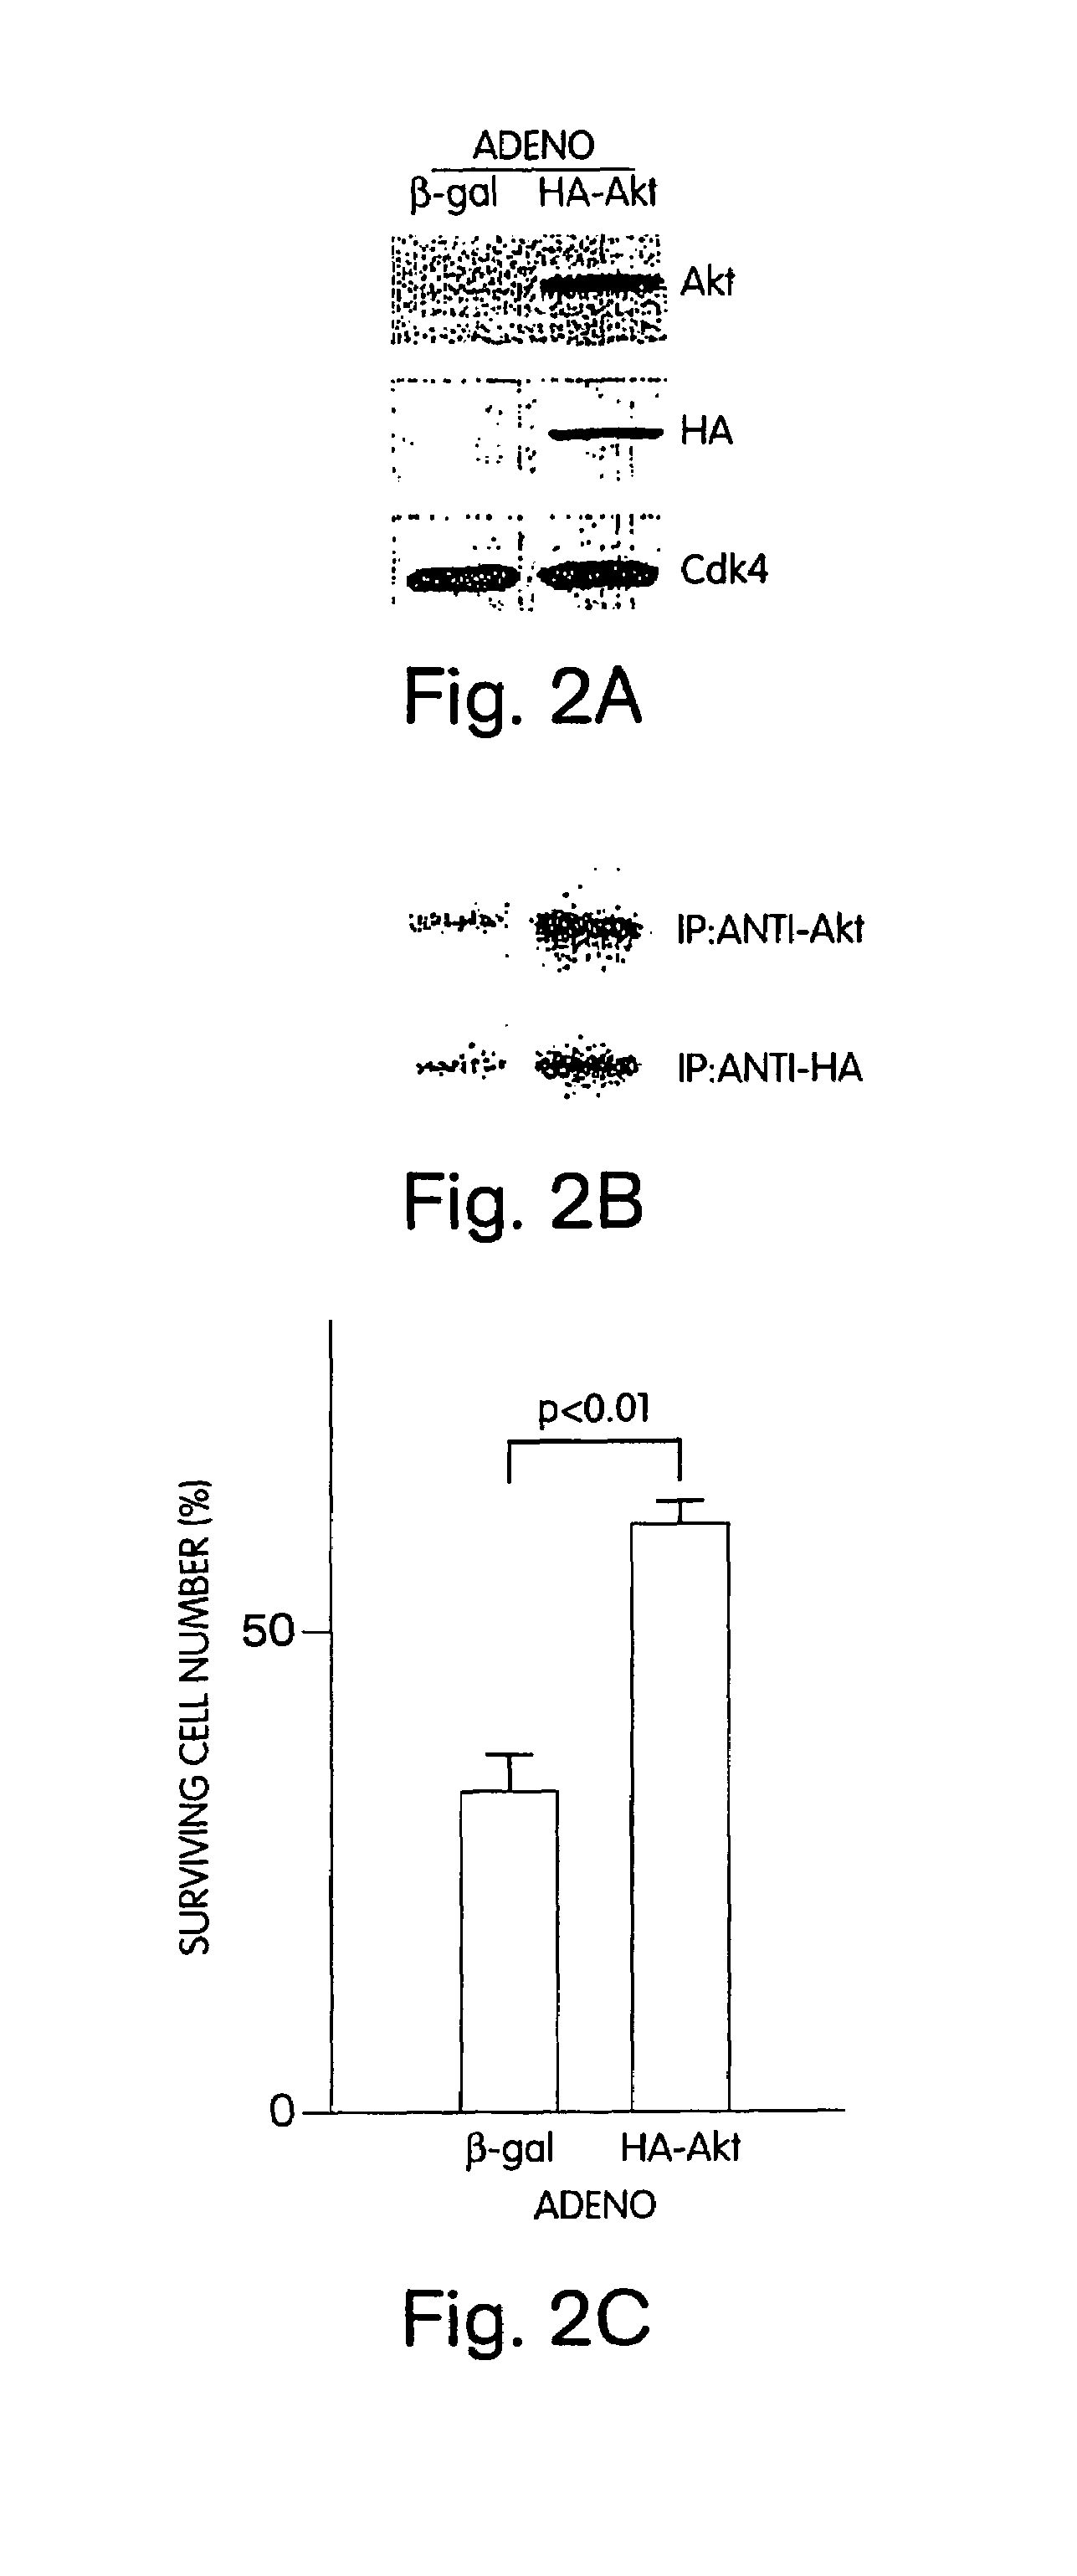 Akt compositions for enhancing survival of cells